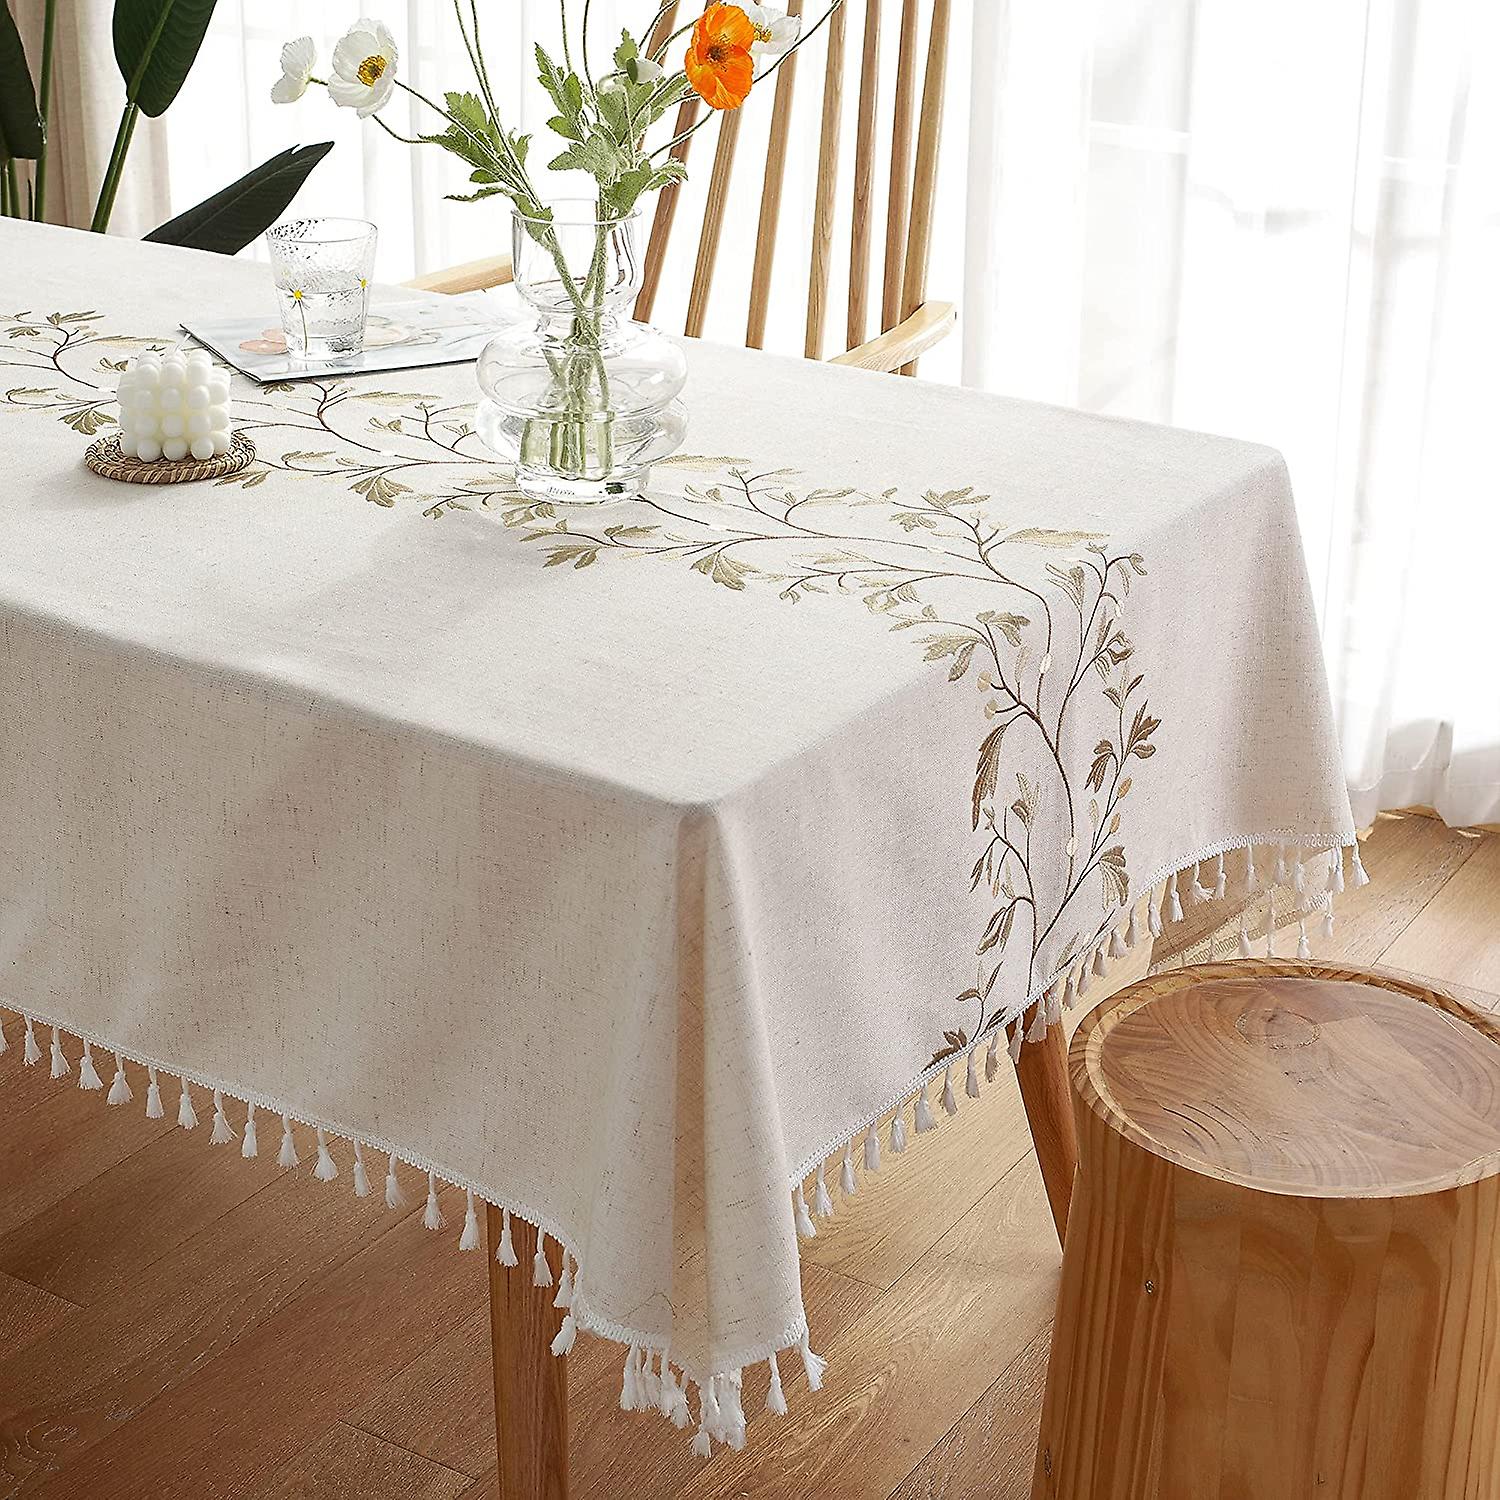 Tablecloth For Dining Table Rustic Table Cover， Farmhouse Kitchen Table Cloth， Cotton Linen Fabric Small Rectangle Table Cloths For 4 To 6 Seats， Beig